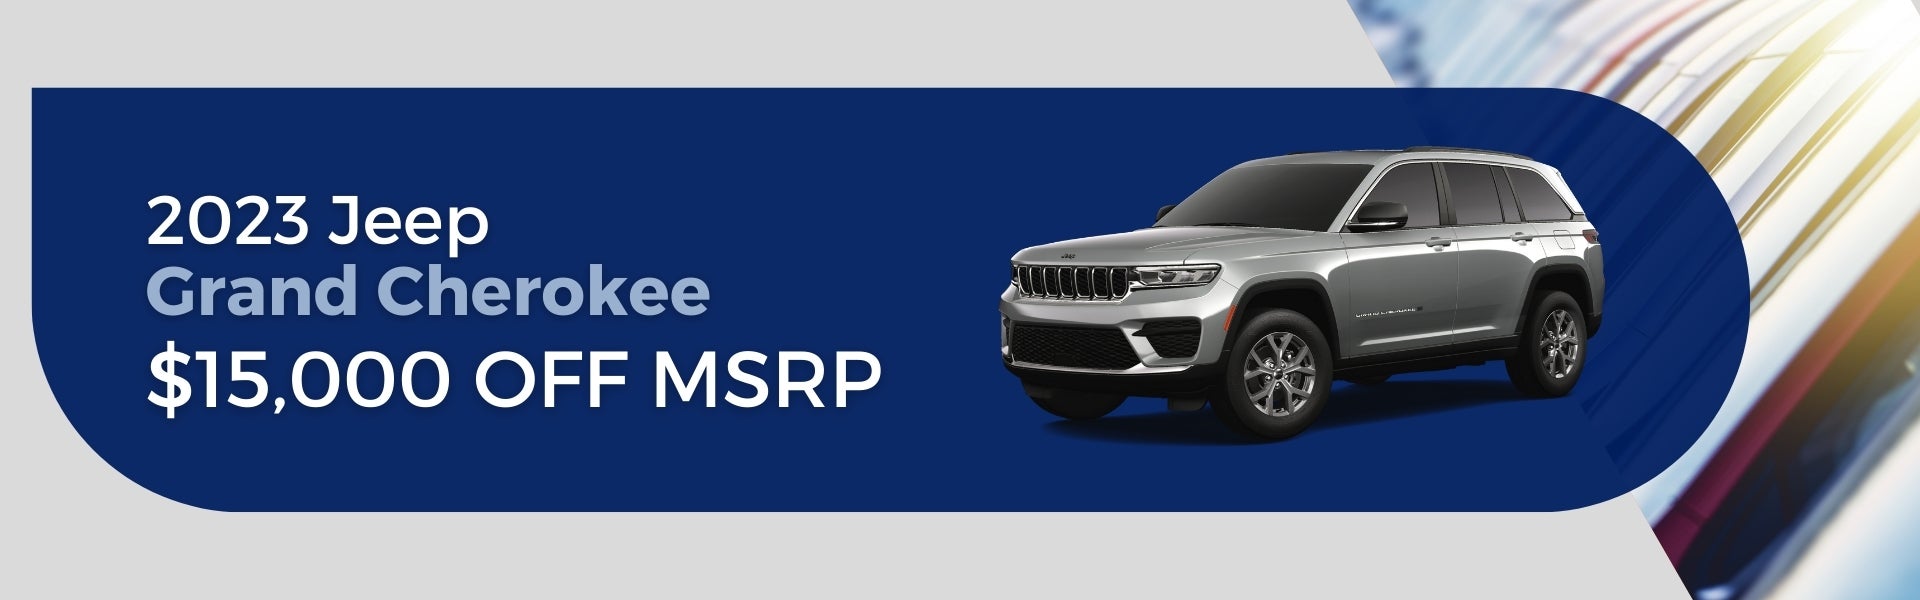 2023 Jeep Grand Cherokee $15,000 Off MSRP